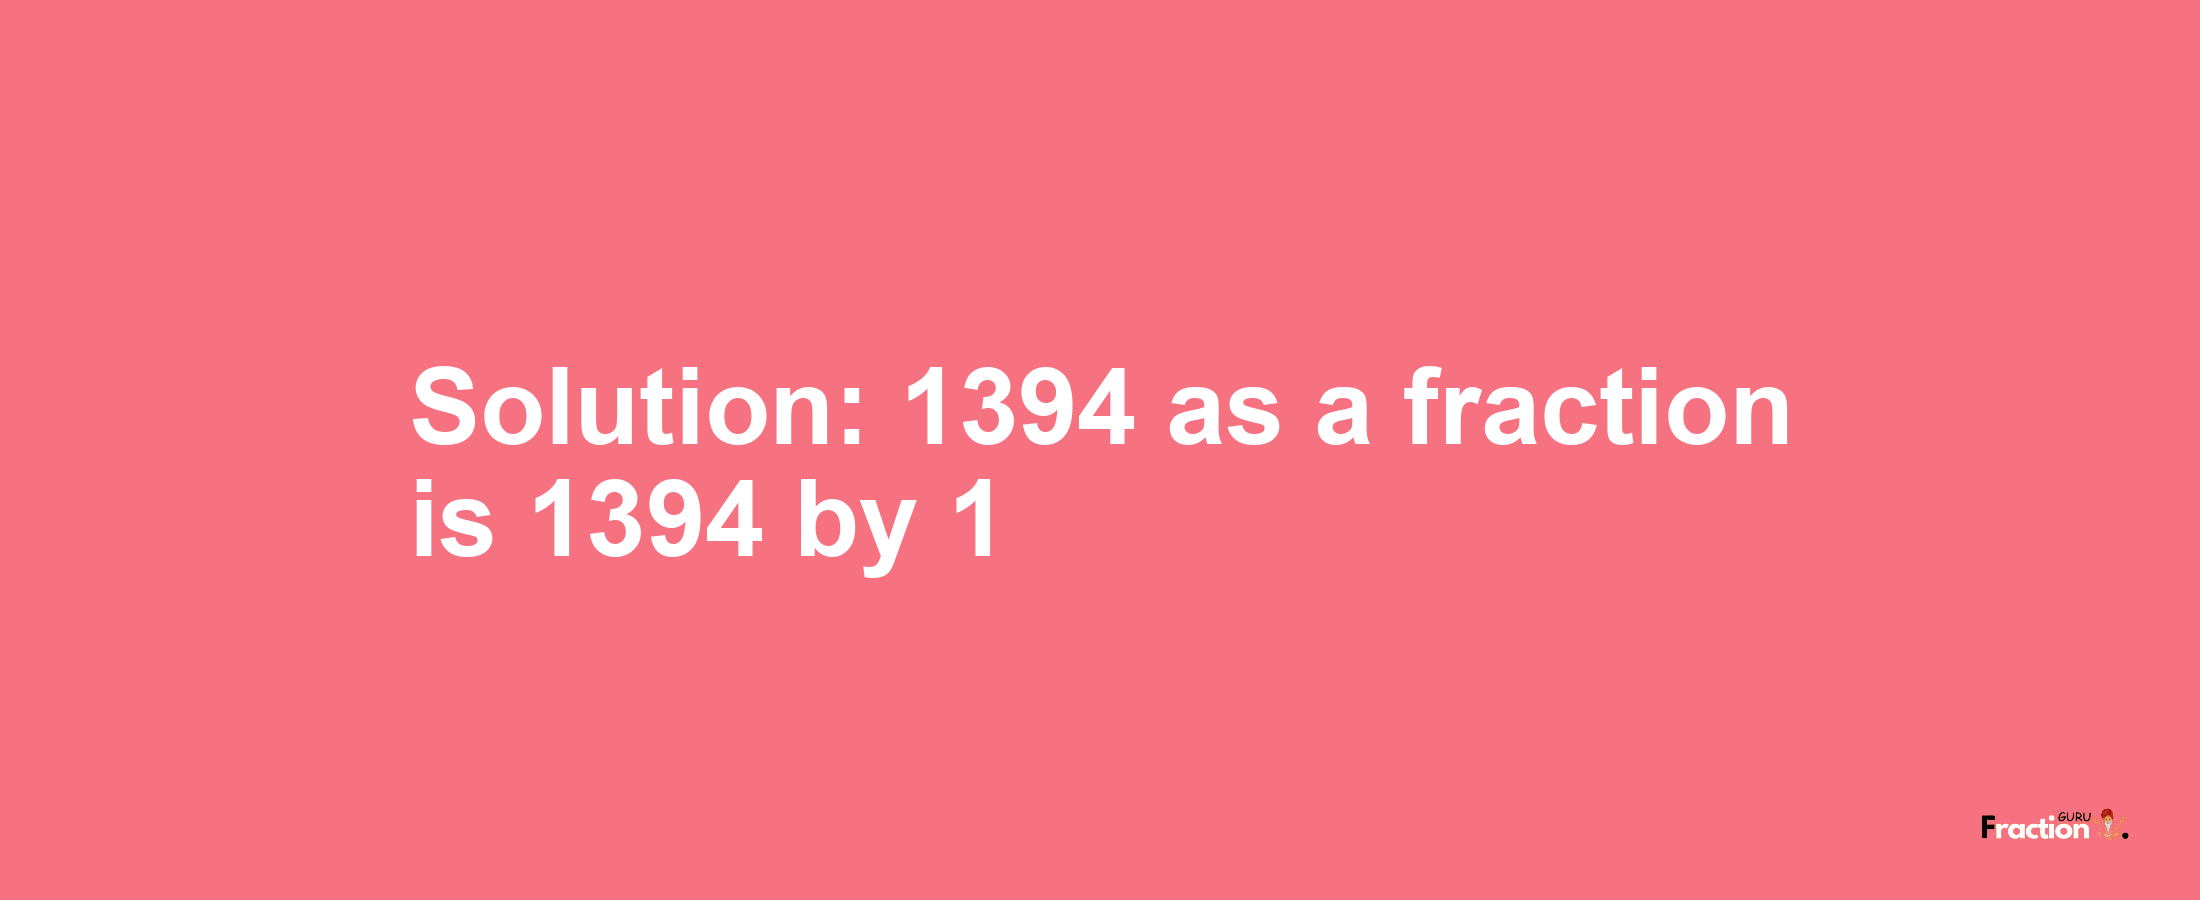 Solution:1394 as a fraction is 1394/1